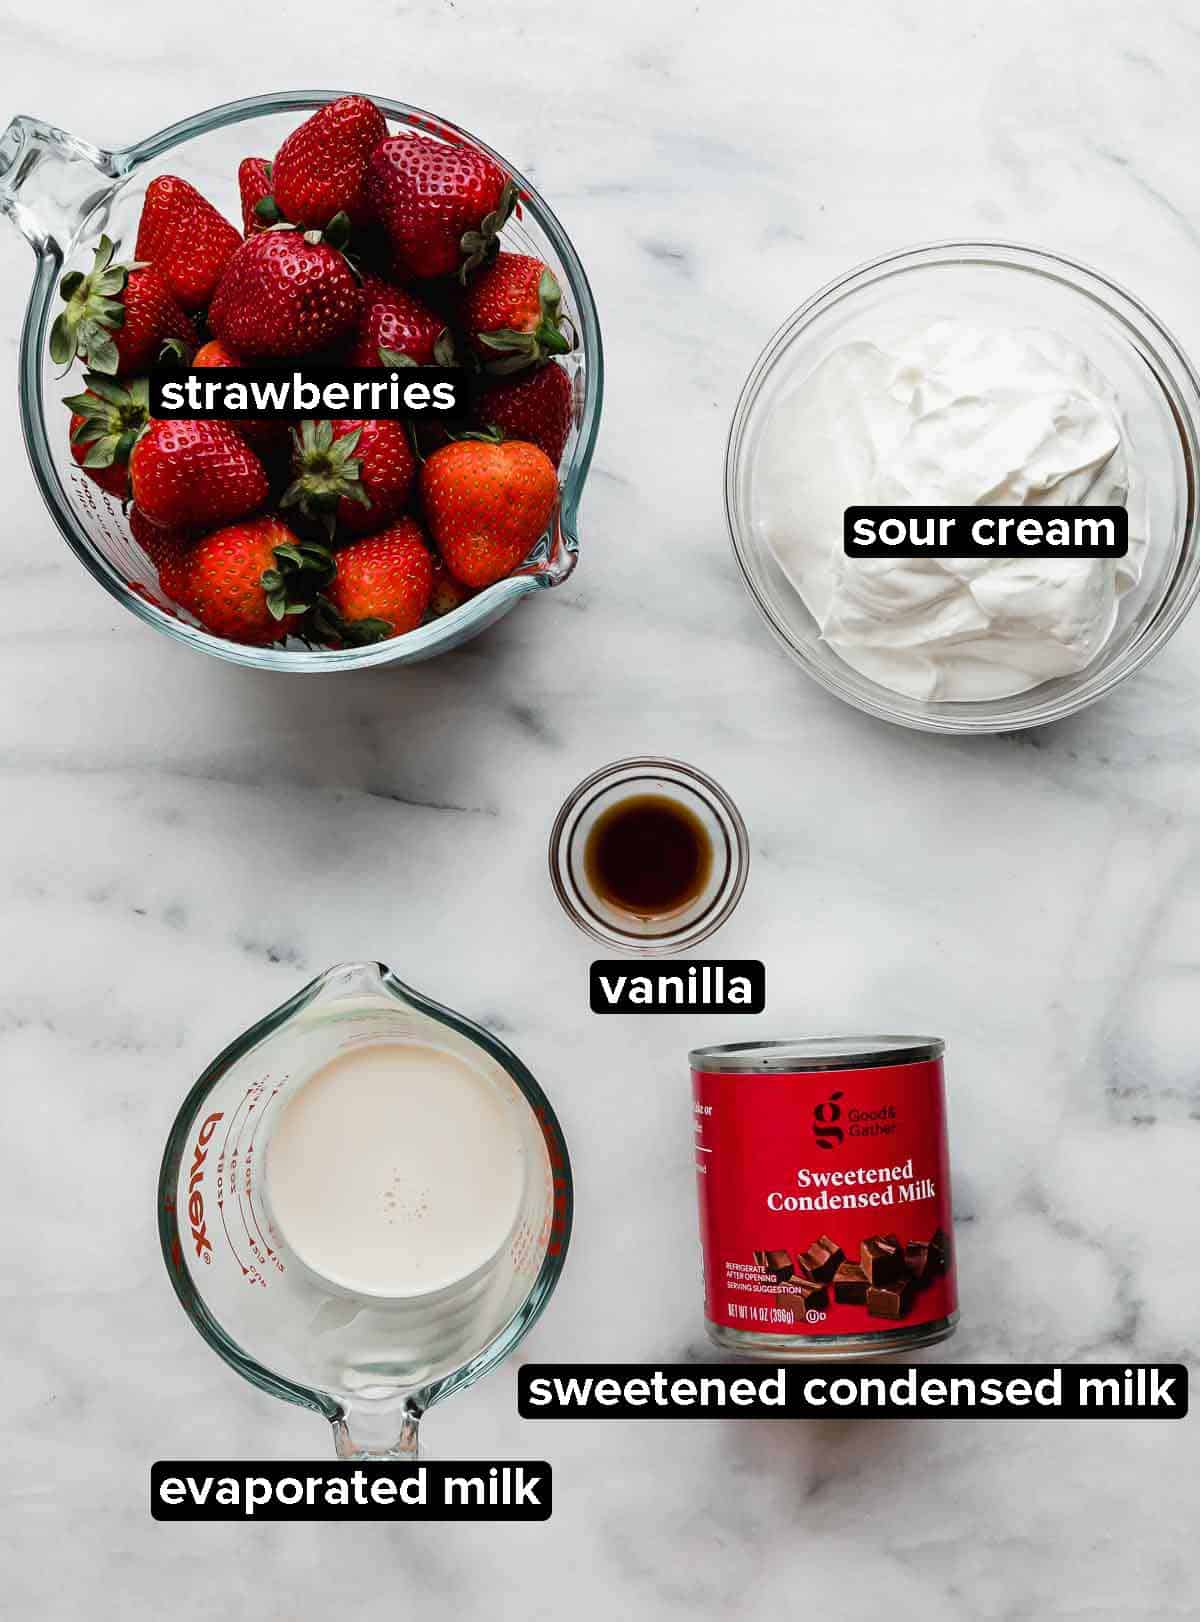 Strawberries and Cream (Fresas con Crema) recipe ingredients portioned into glass bowls on a white and gray marbled background.